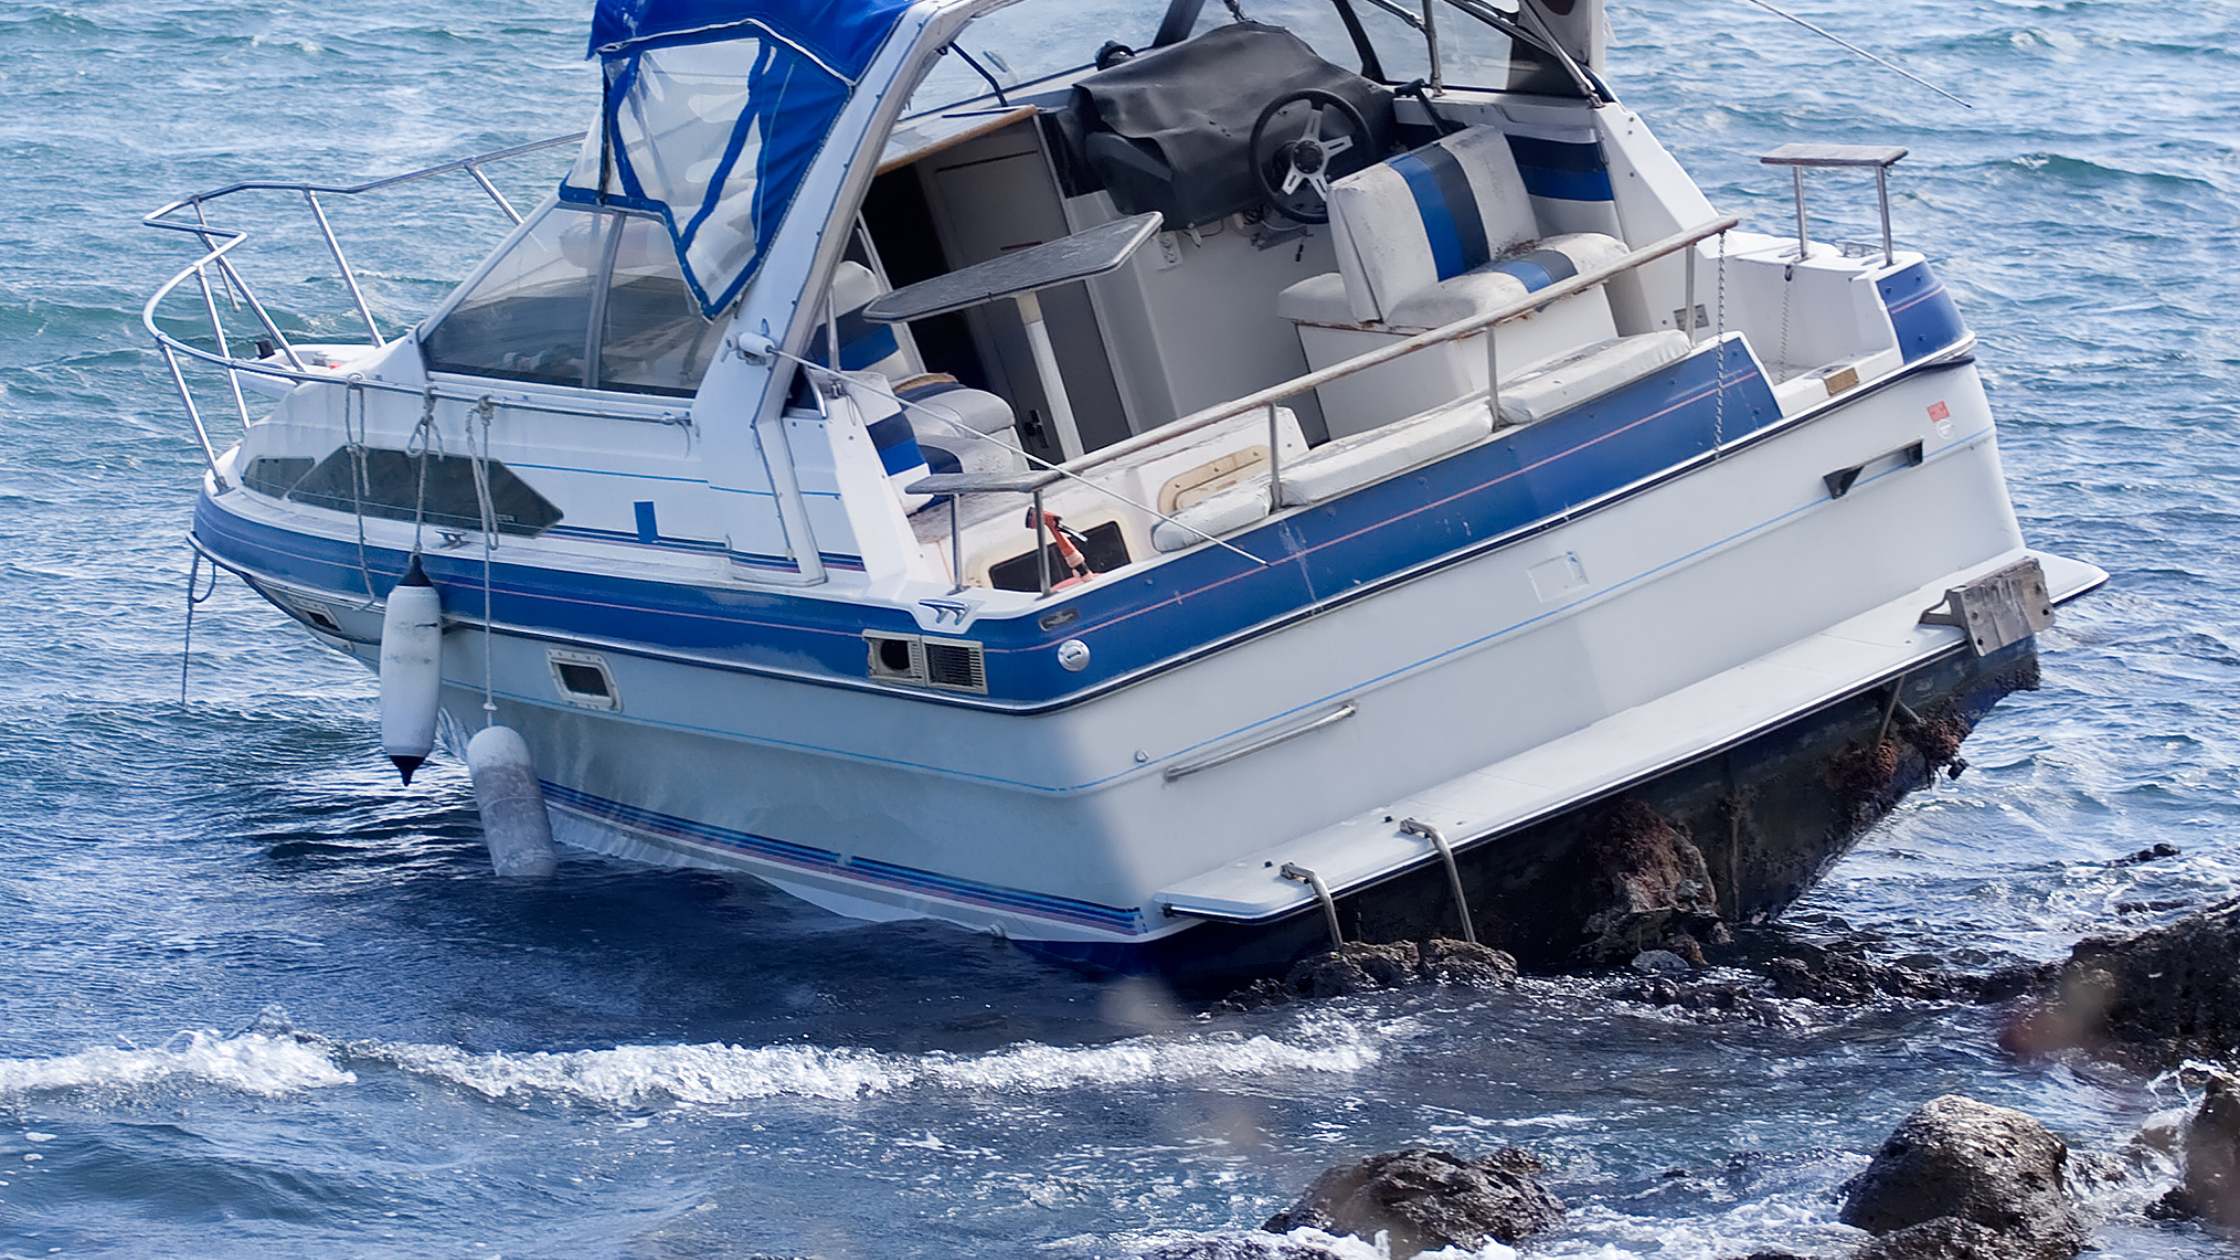 Snag-A-Slip Blog - Common Boating Mistakes and How to Avoid Them